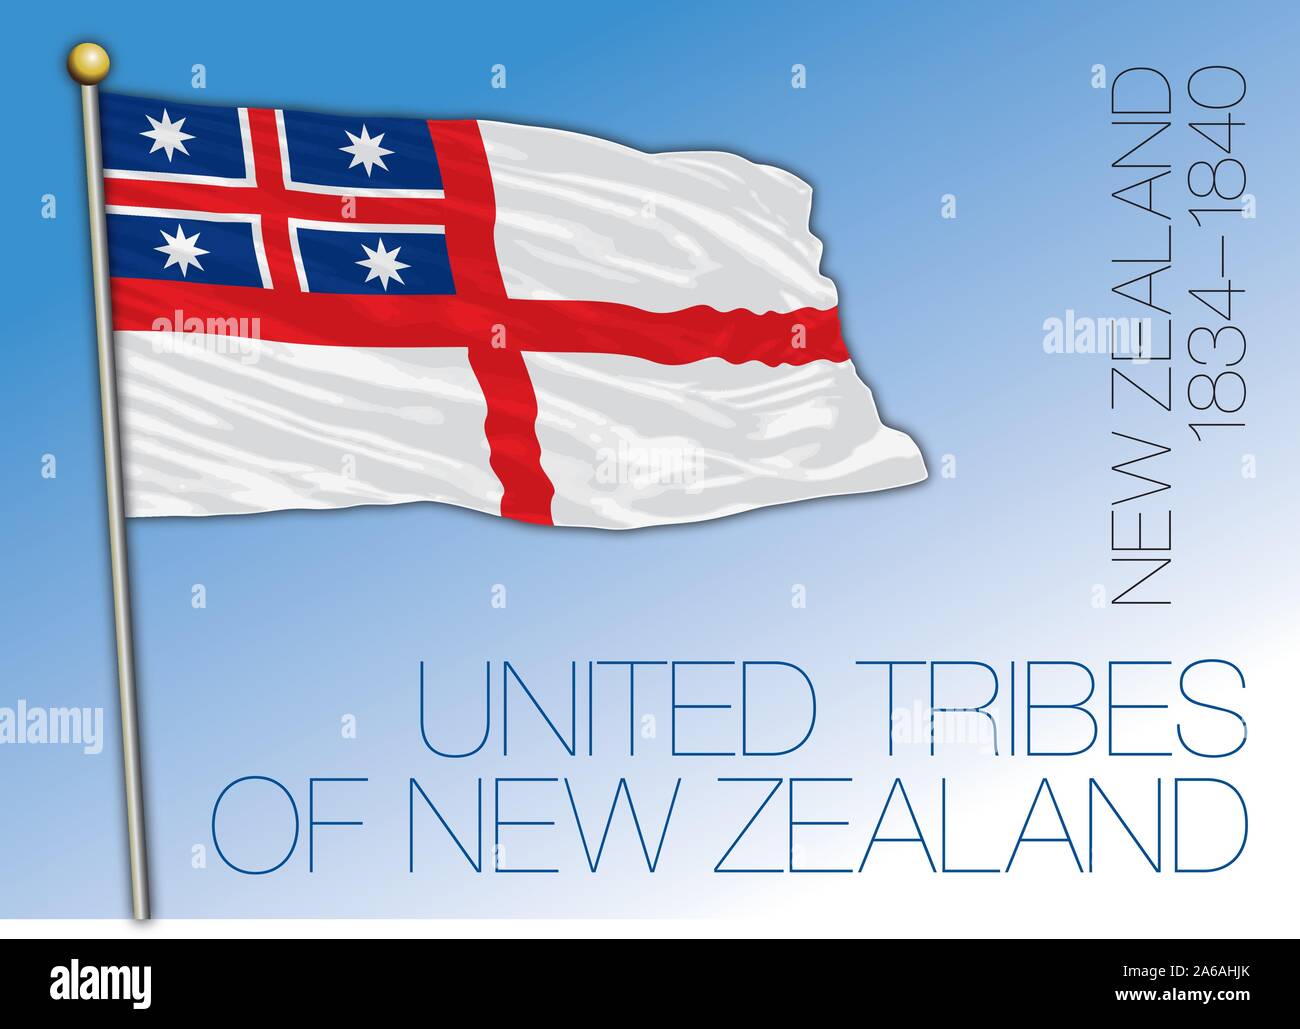 New Zealand, historical flag, United Tribes of New Zealand, 1834 - 1840, vector illustration Stock Vector